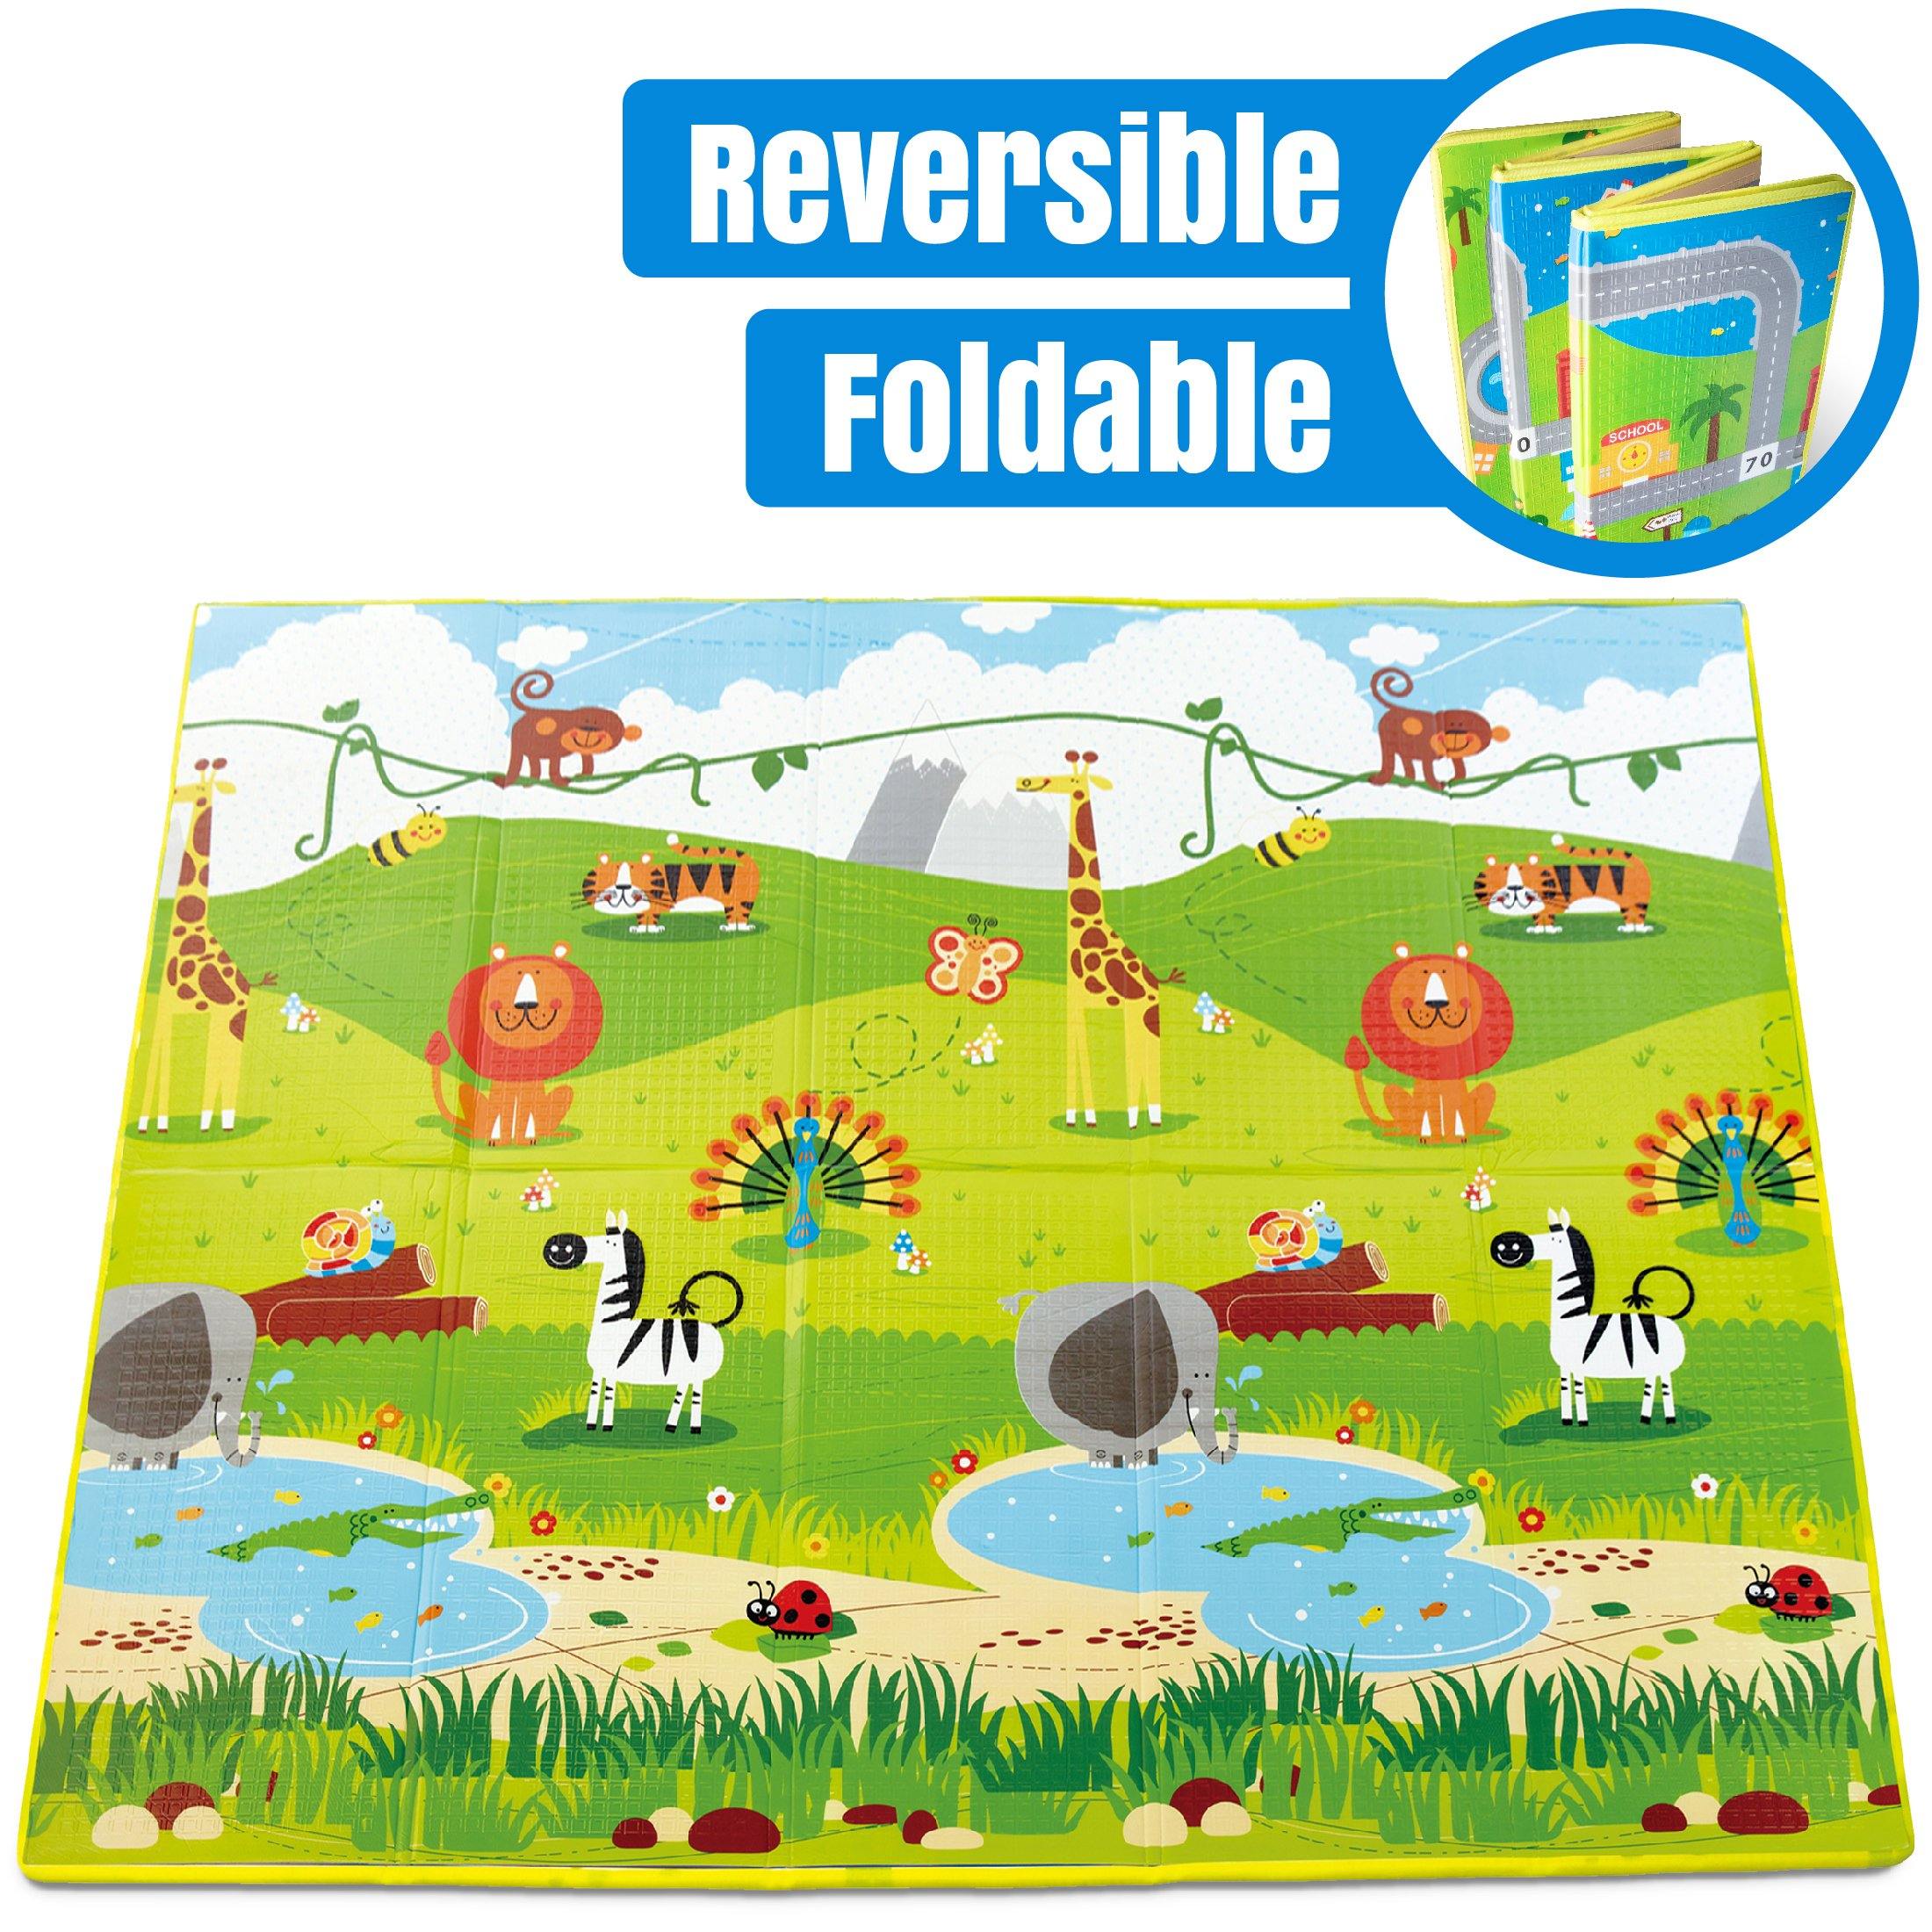 Comfortable foam play mats perfect as indoor or outdoor mats for playing and crawling. Folding play mats contain no BPA makes it safe for babies 3 months and up to crawl on.